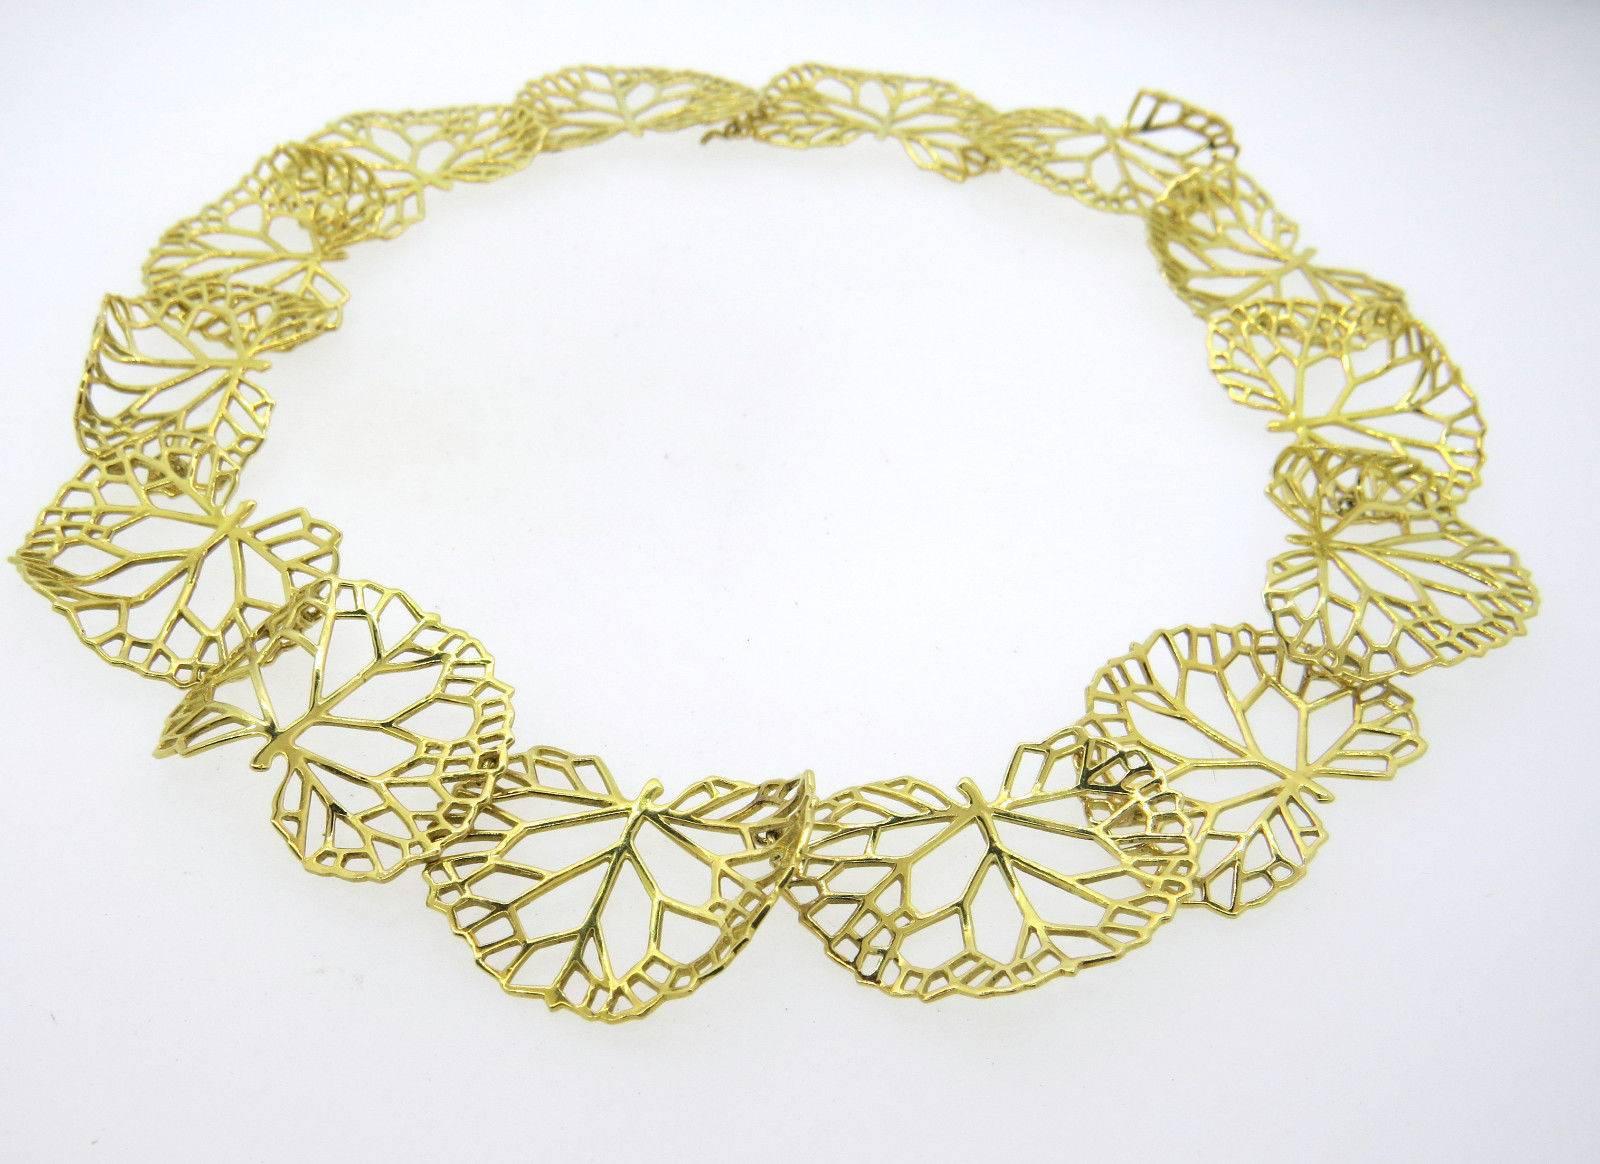 An 18k yellow gold necklace in a leaf motif.  Crafted by Angela Cummings, the necklace is 17